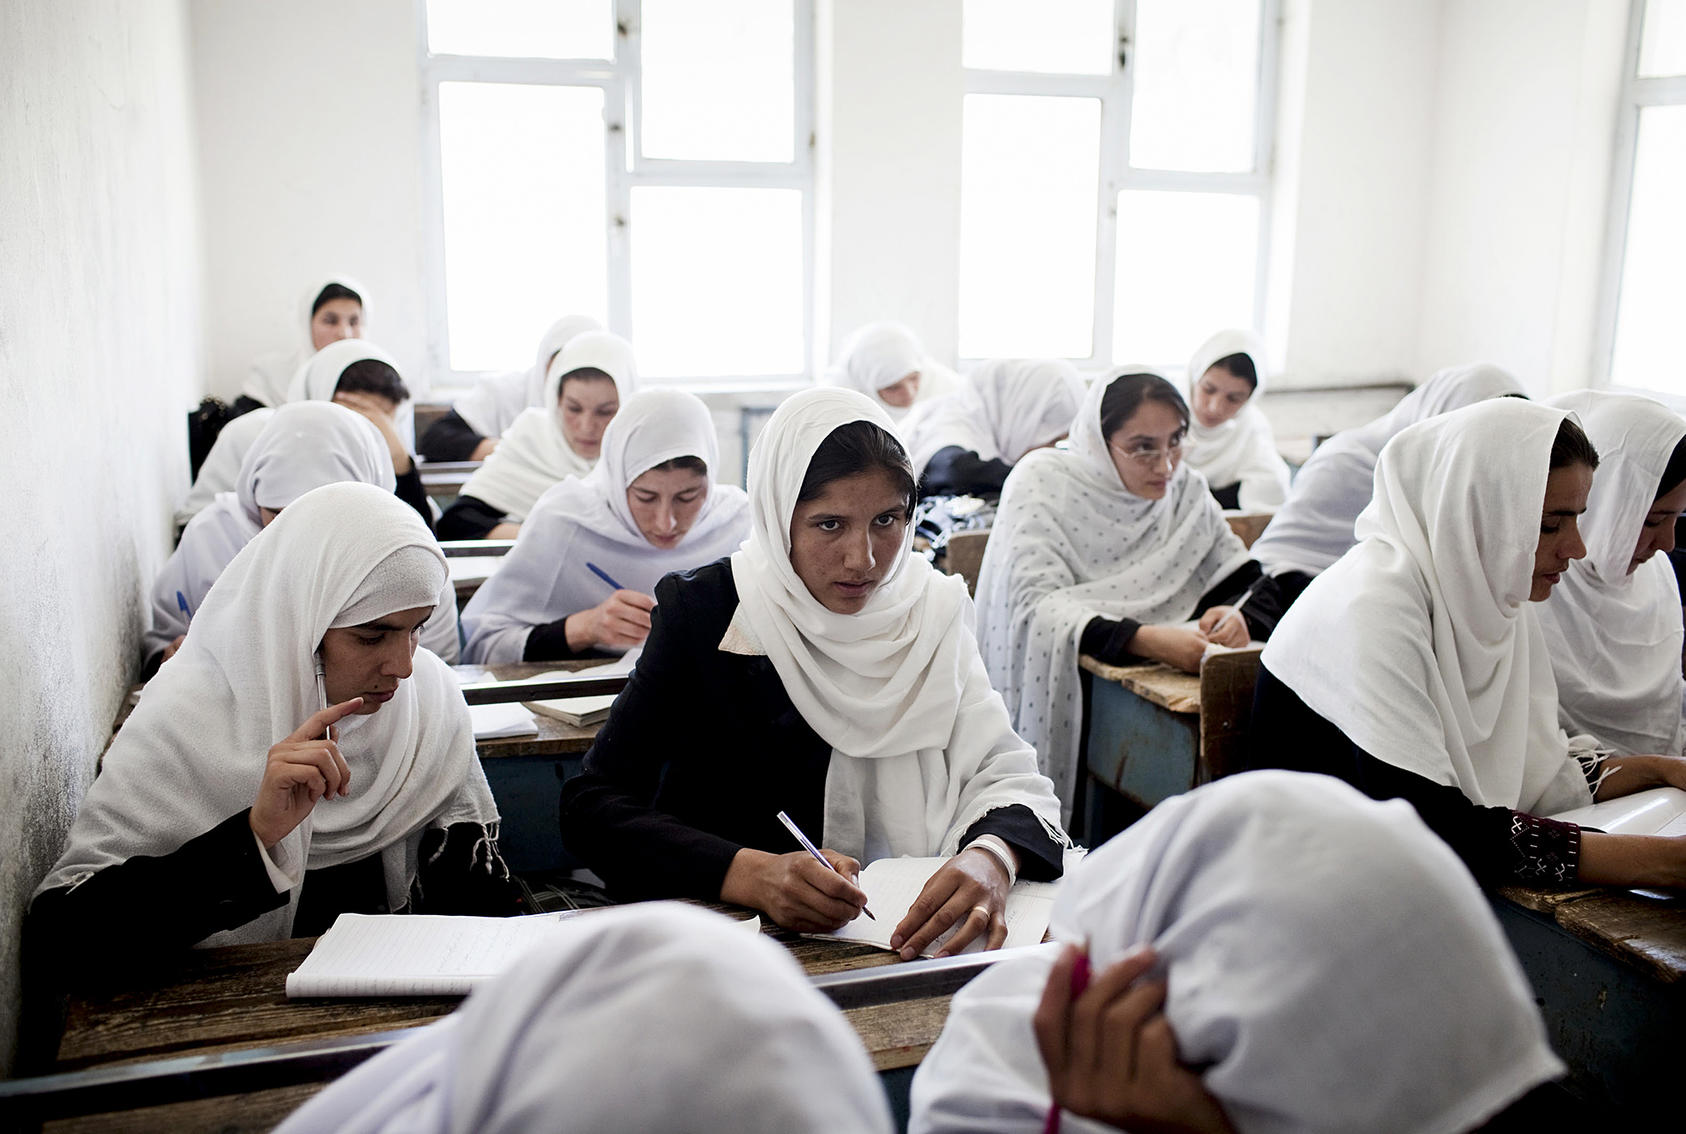 Female Afghan students at the Jamal Agha Girls School in Kapisa province, Afghanistan. Women’s education has been one of the biggest success stories post-2001, but many fear these gains could be sacrificed for peace. (Adam Ferguson/The New York Times)